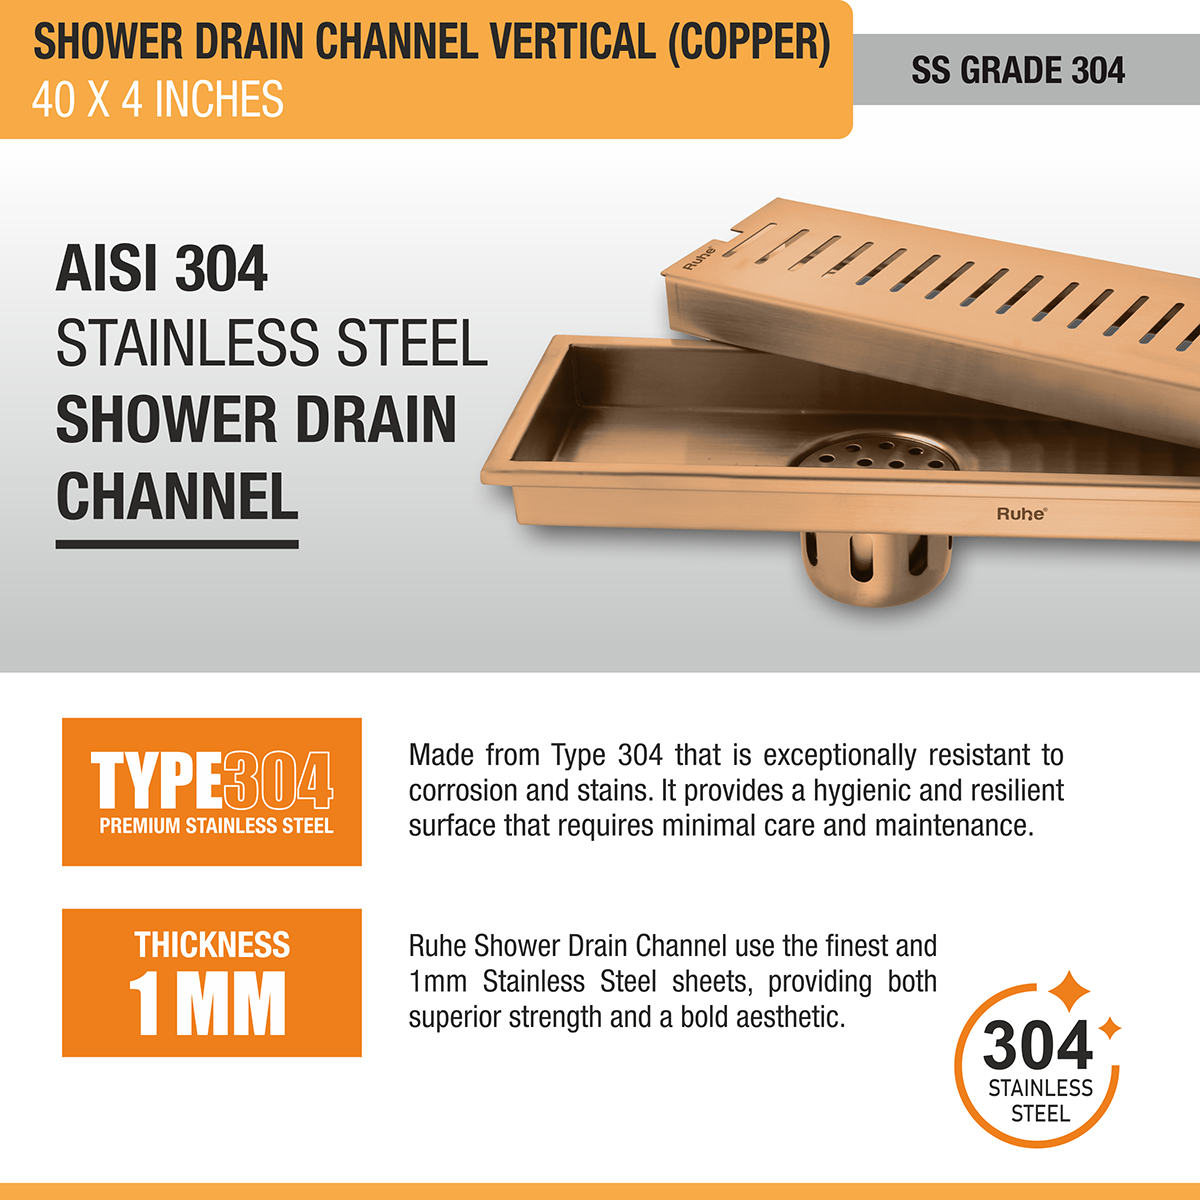 Vertical Shower Drain Channel (40 x 4 Inches) ROSE GOLD/ANTIQUE COPPER stainless steel